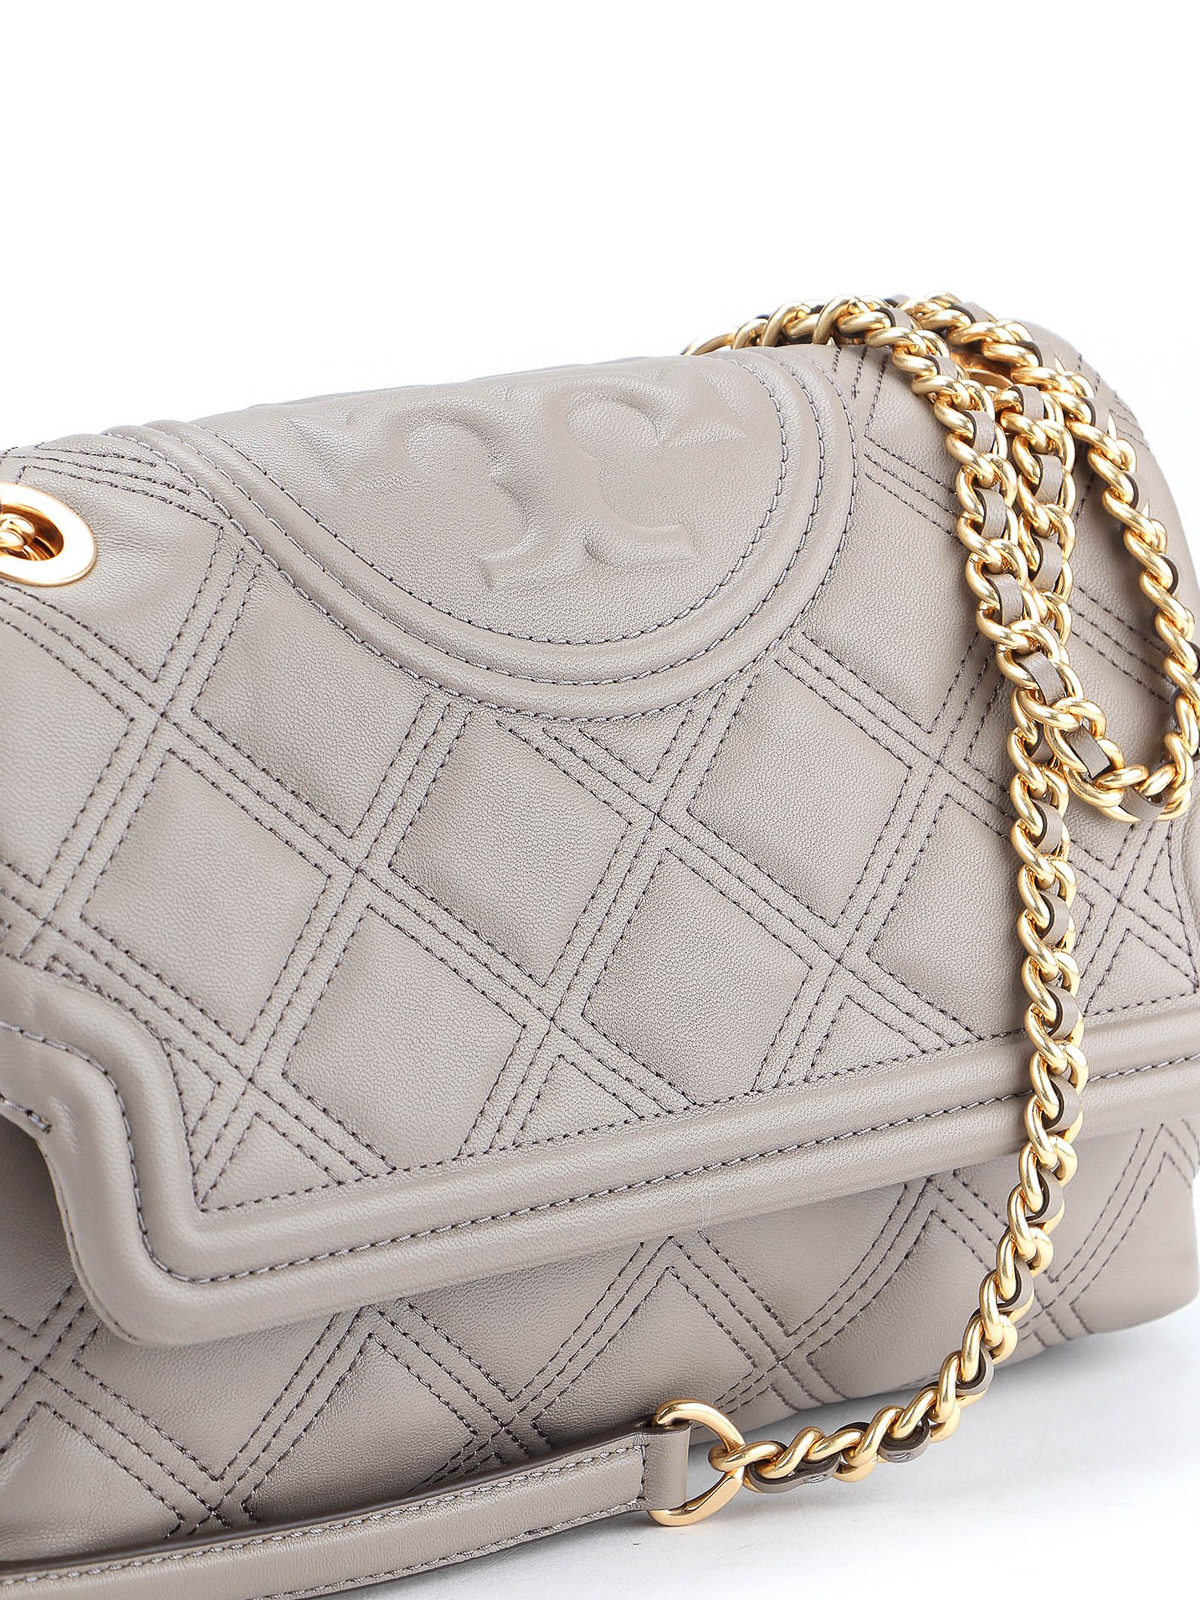 Tory Burch Fleming Soft Small Convertible Bag in Gray